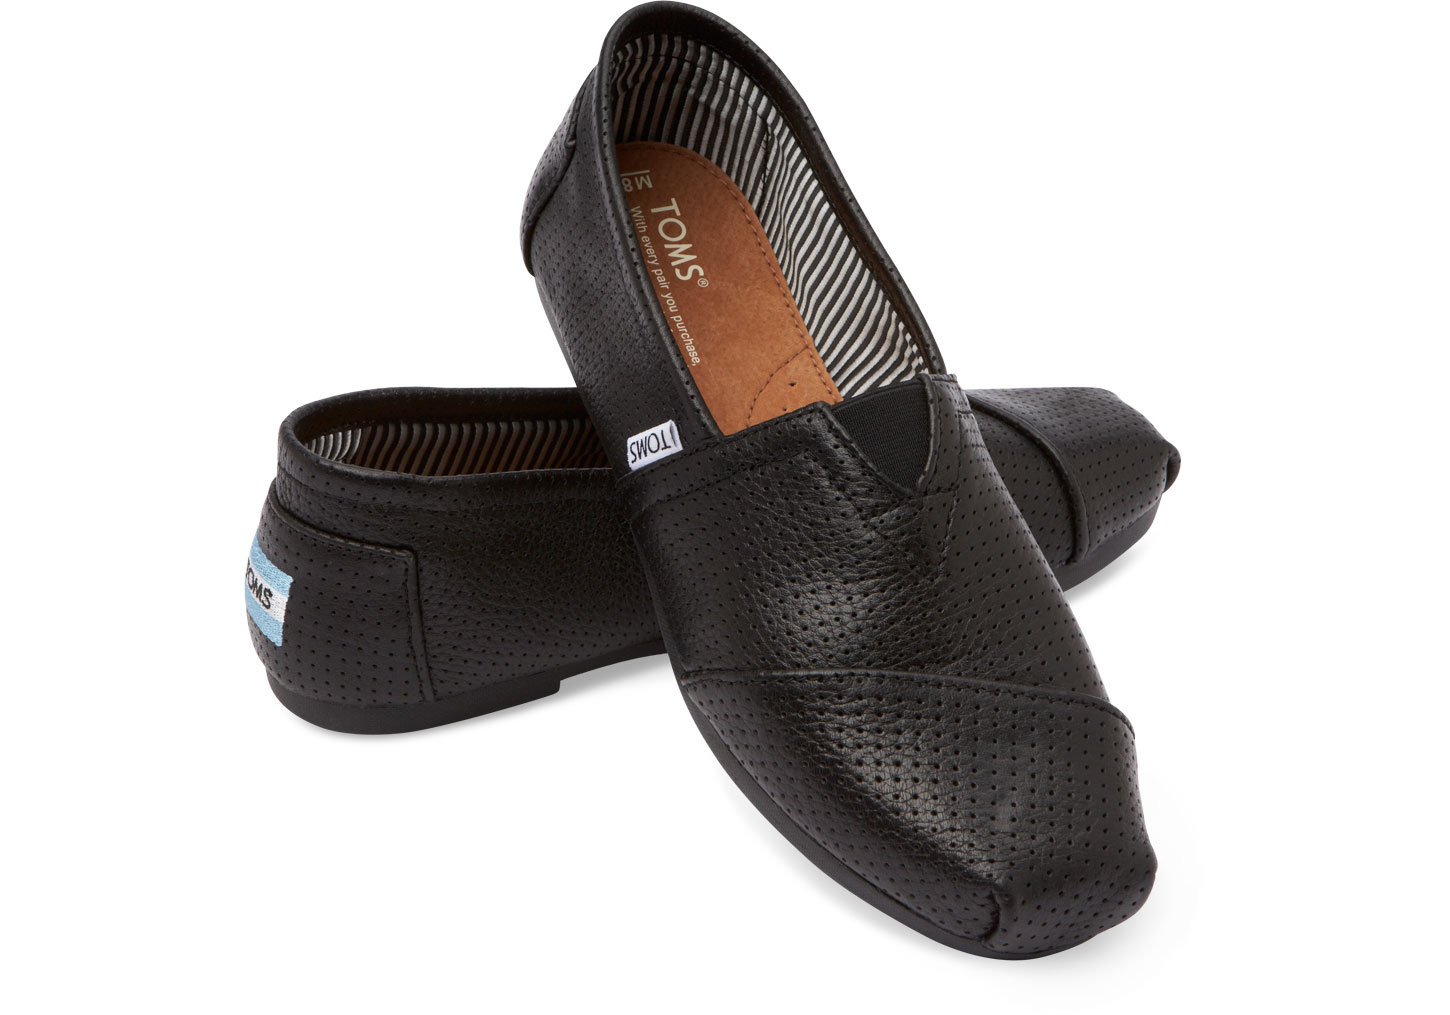 TOMS Black Perforated Leather Men's Classics for Men - Lyst